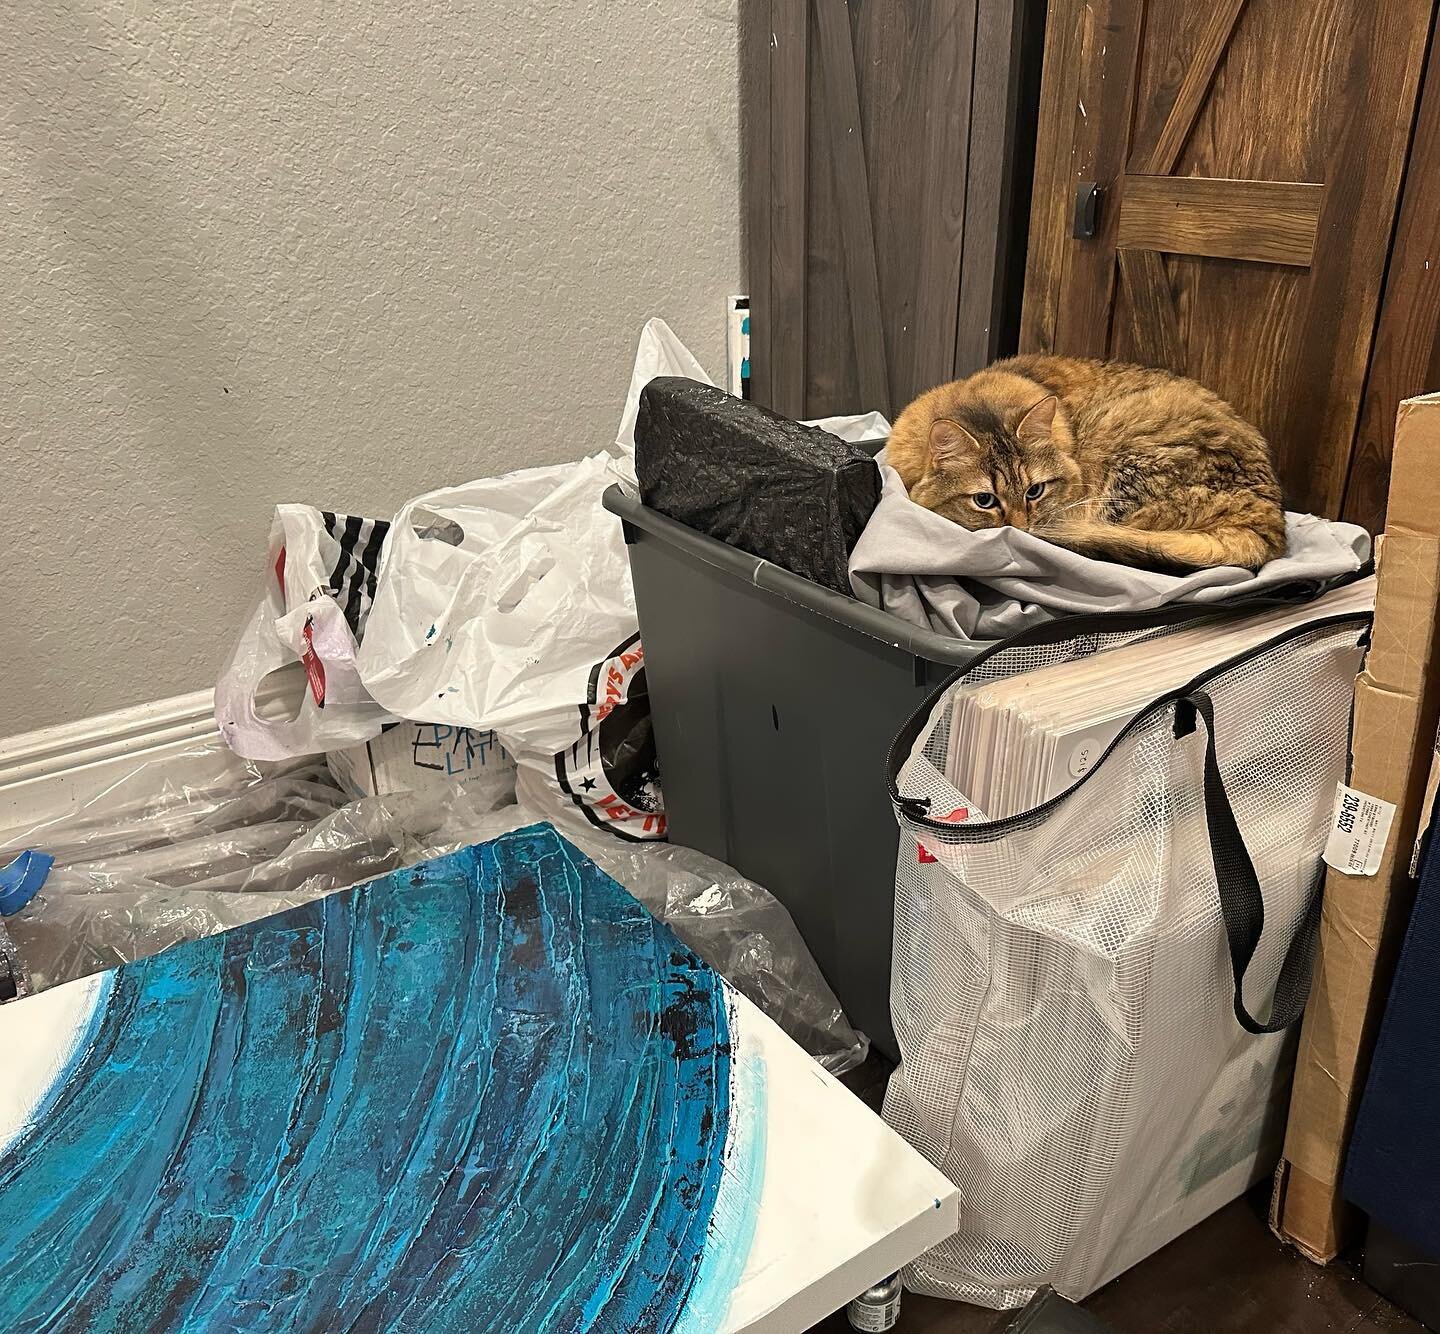 My cat is &ldquo;helpfully&rdquo; monitoring my new painting&rsquo;s progress from her perch on top of a stack of my small paintings lined up on their sides.  There&rsquo;s a couch right beside this but I suppose this is more comfortable? 🤦&zwj;♀️ 
